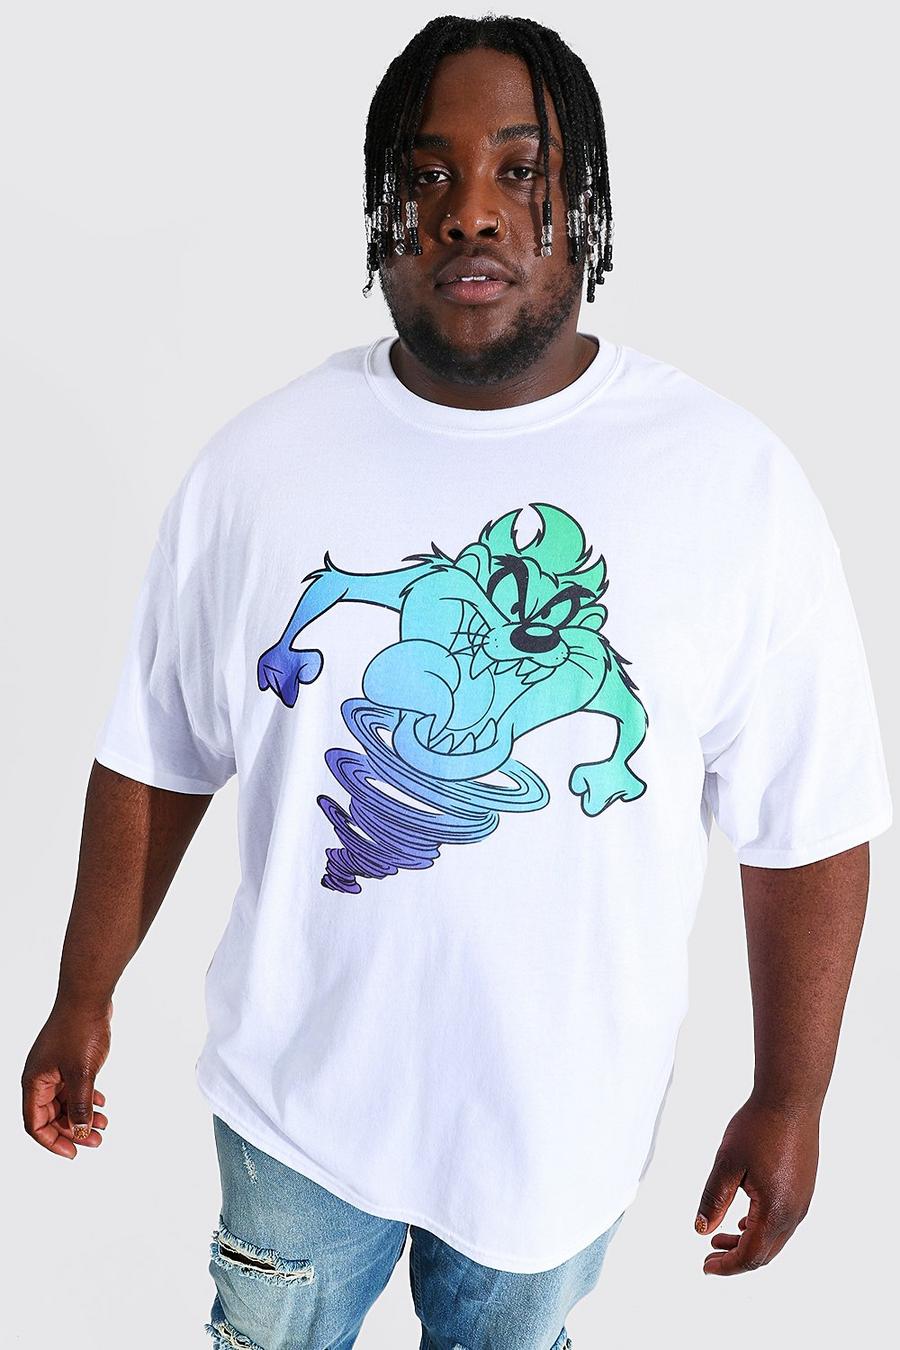 T-shirt Plus Size ufficiale Looney Tunes Taz, White image number 1